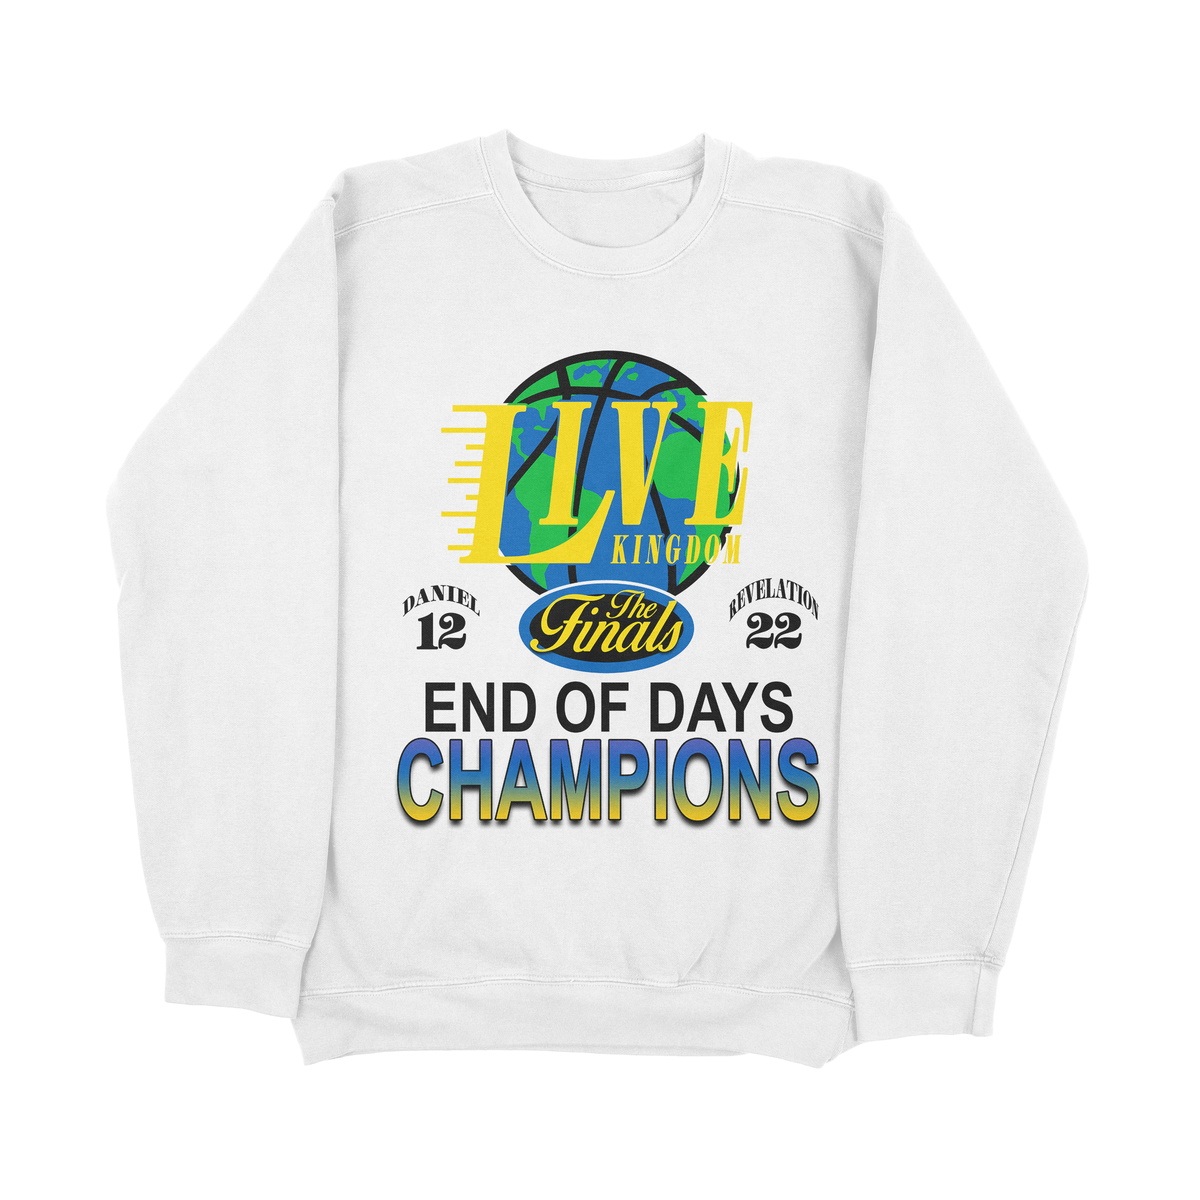 End Of Days Champions - Classic Crewneck